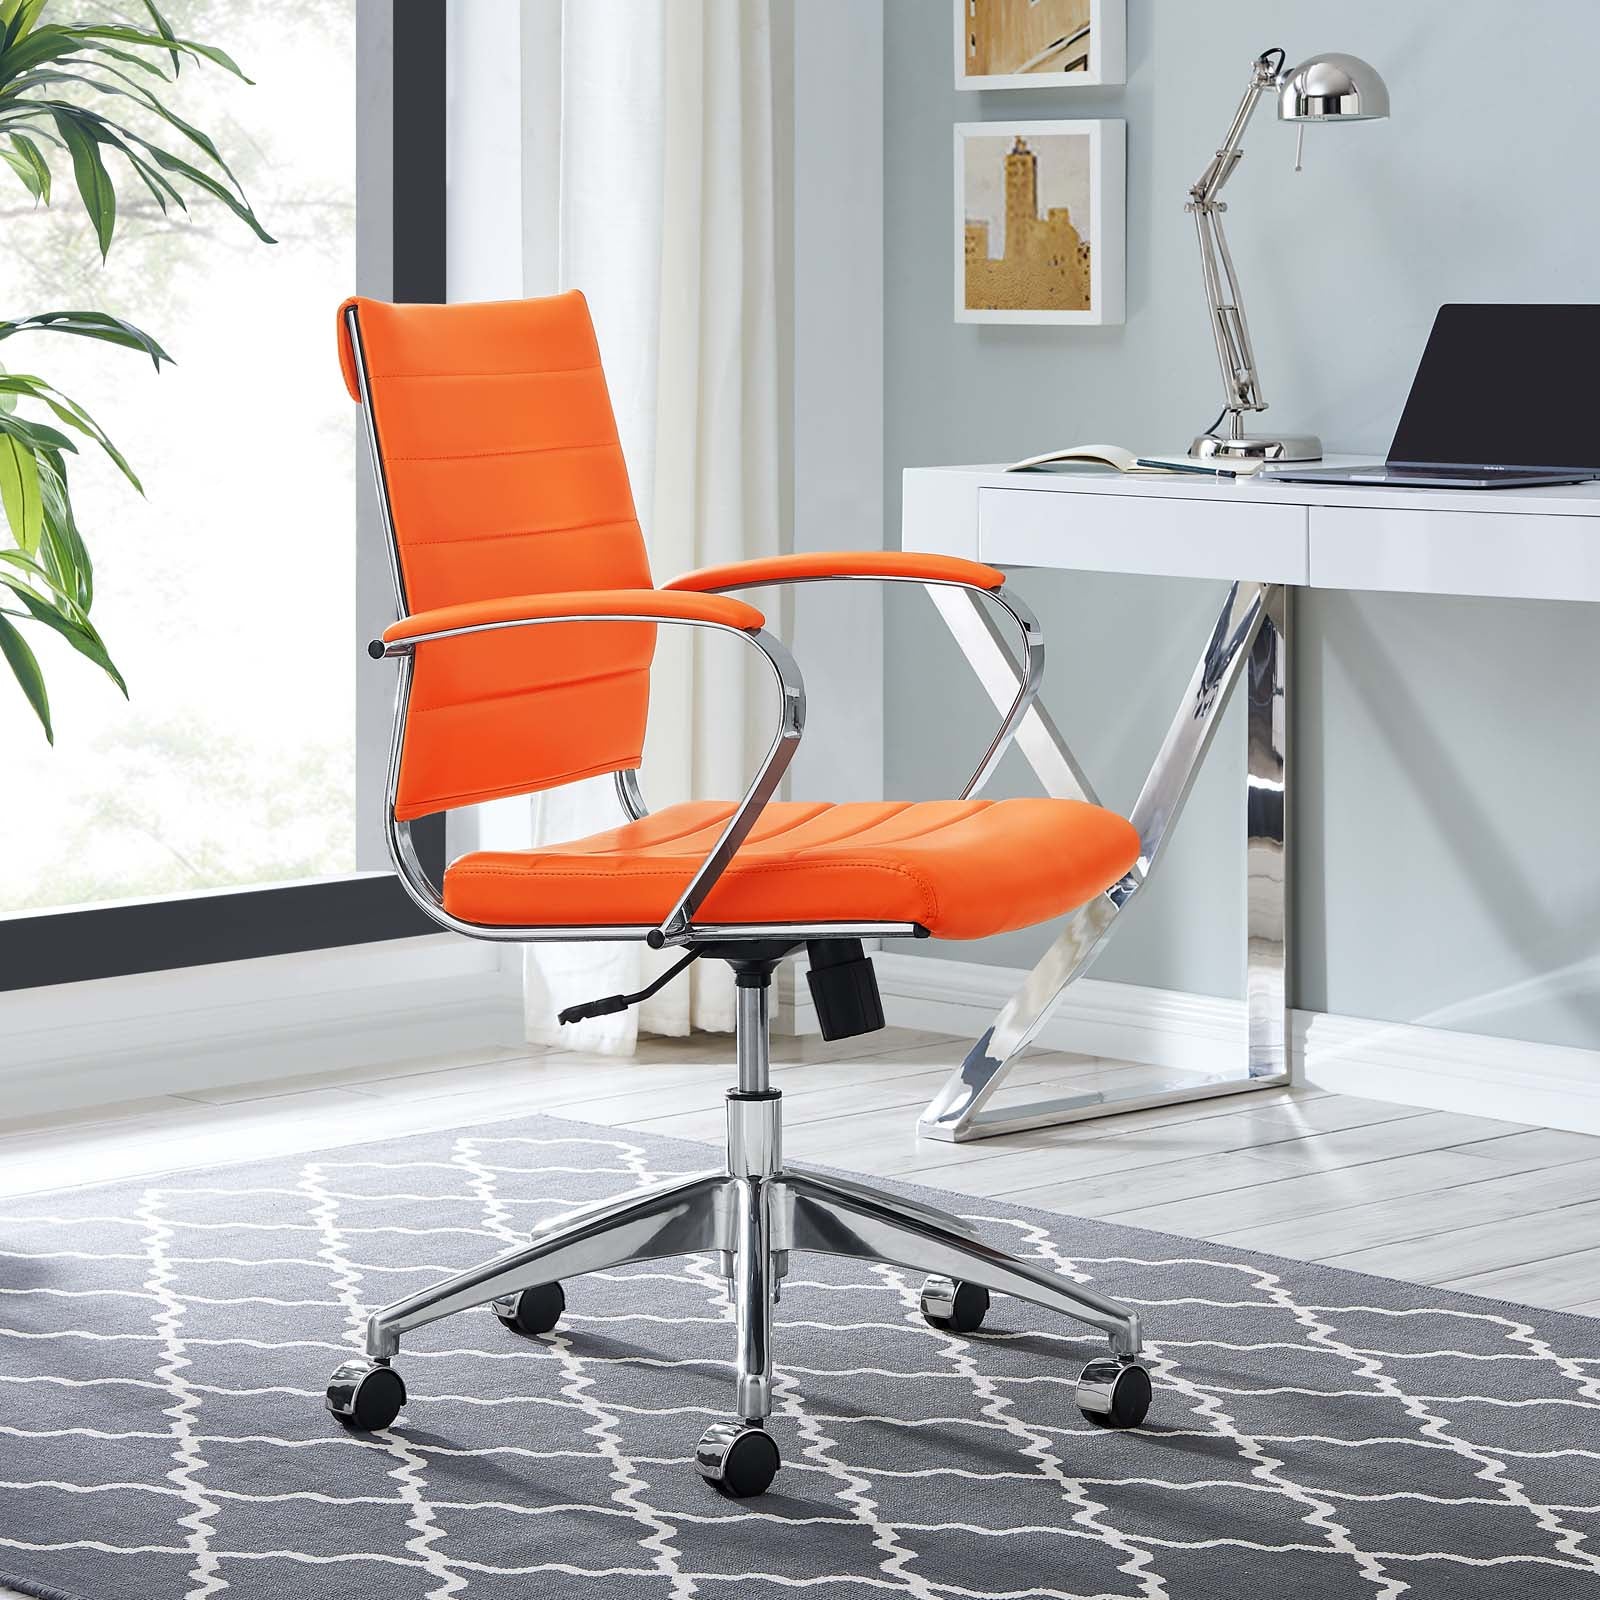 Modway Task Chairs - Jive Mid Back Office Chair Orange